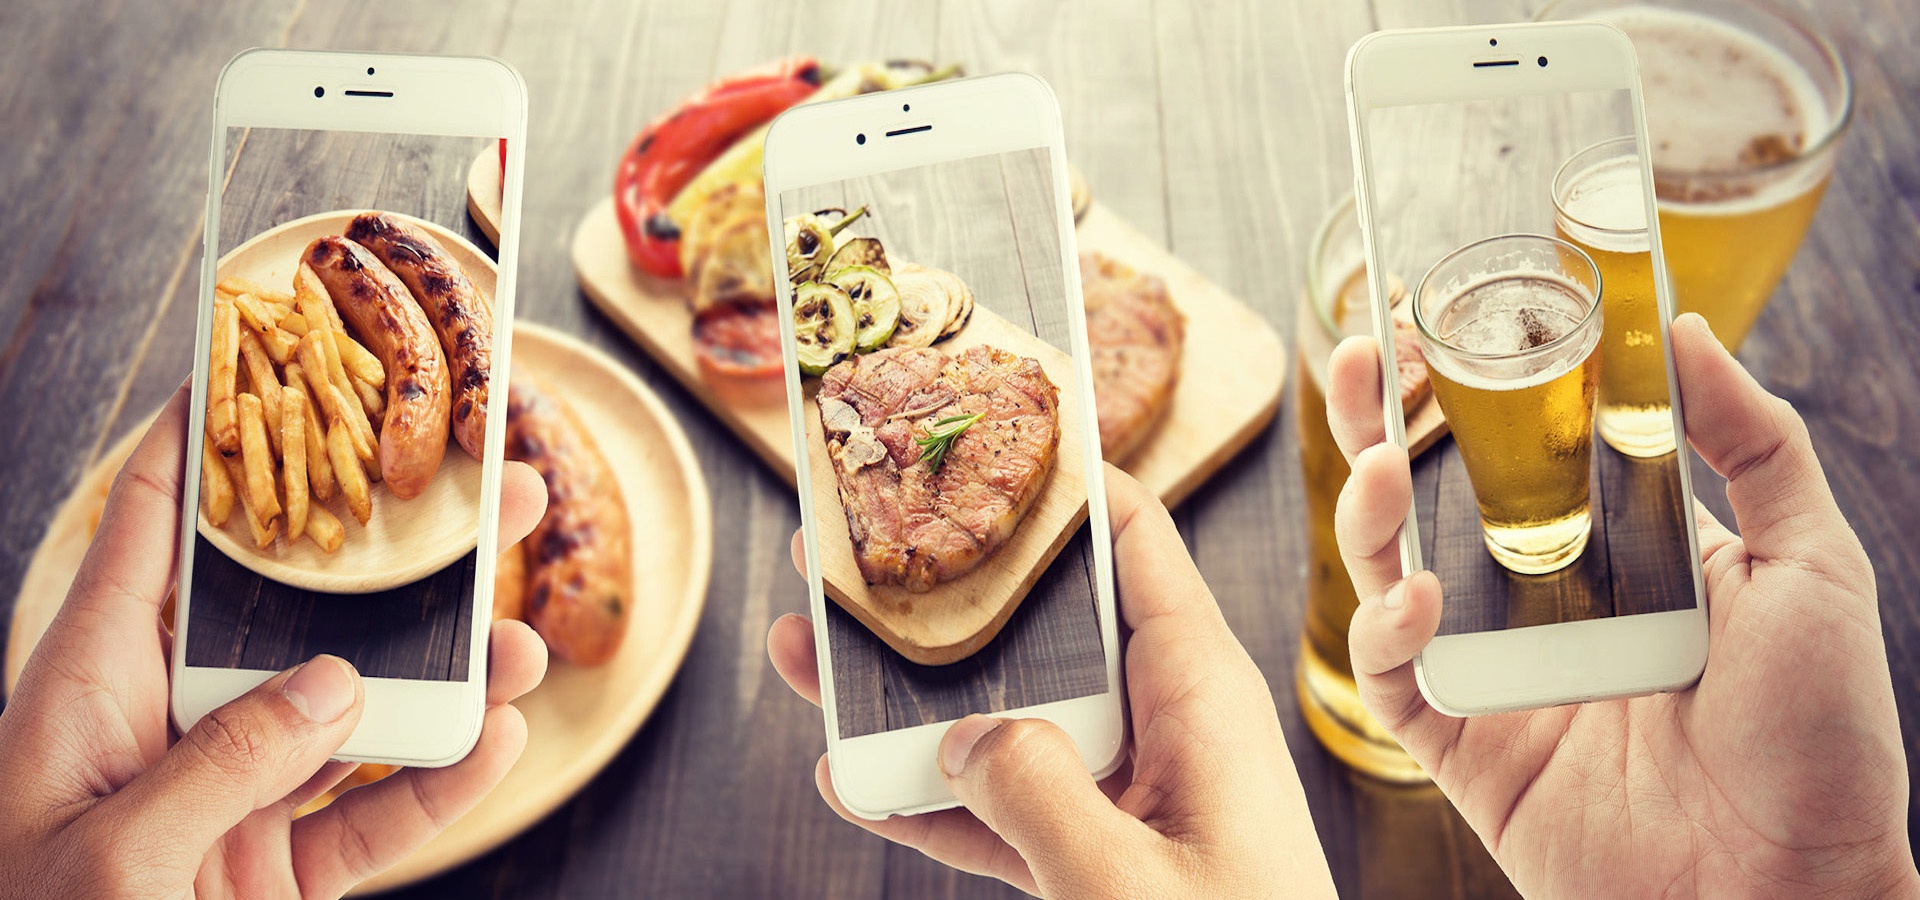 Smartphone pictures of hot dogs, fries, steak and beer